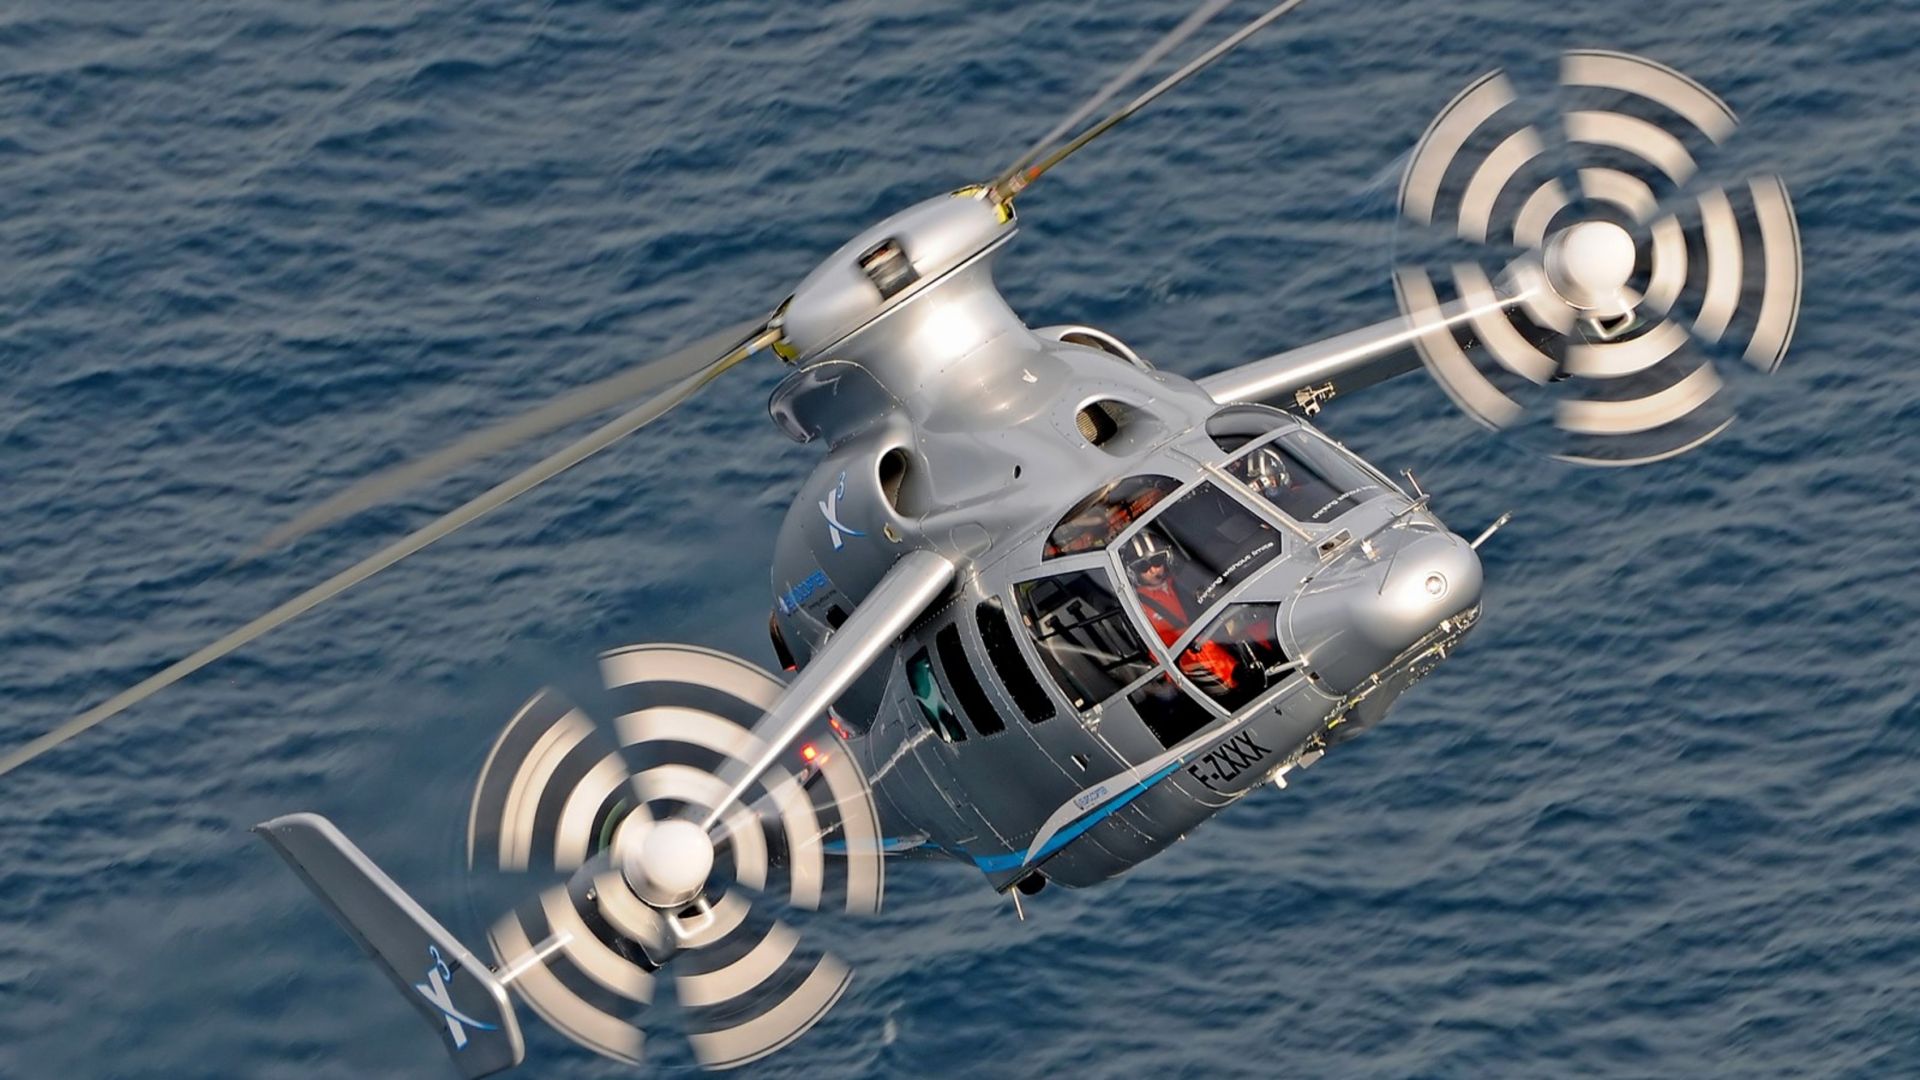 Eurocopter X3, Helicopter, speed, hybrid (horizontal)